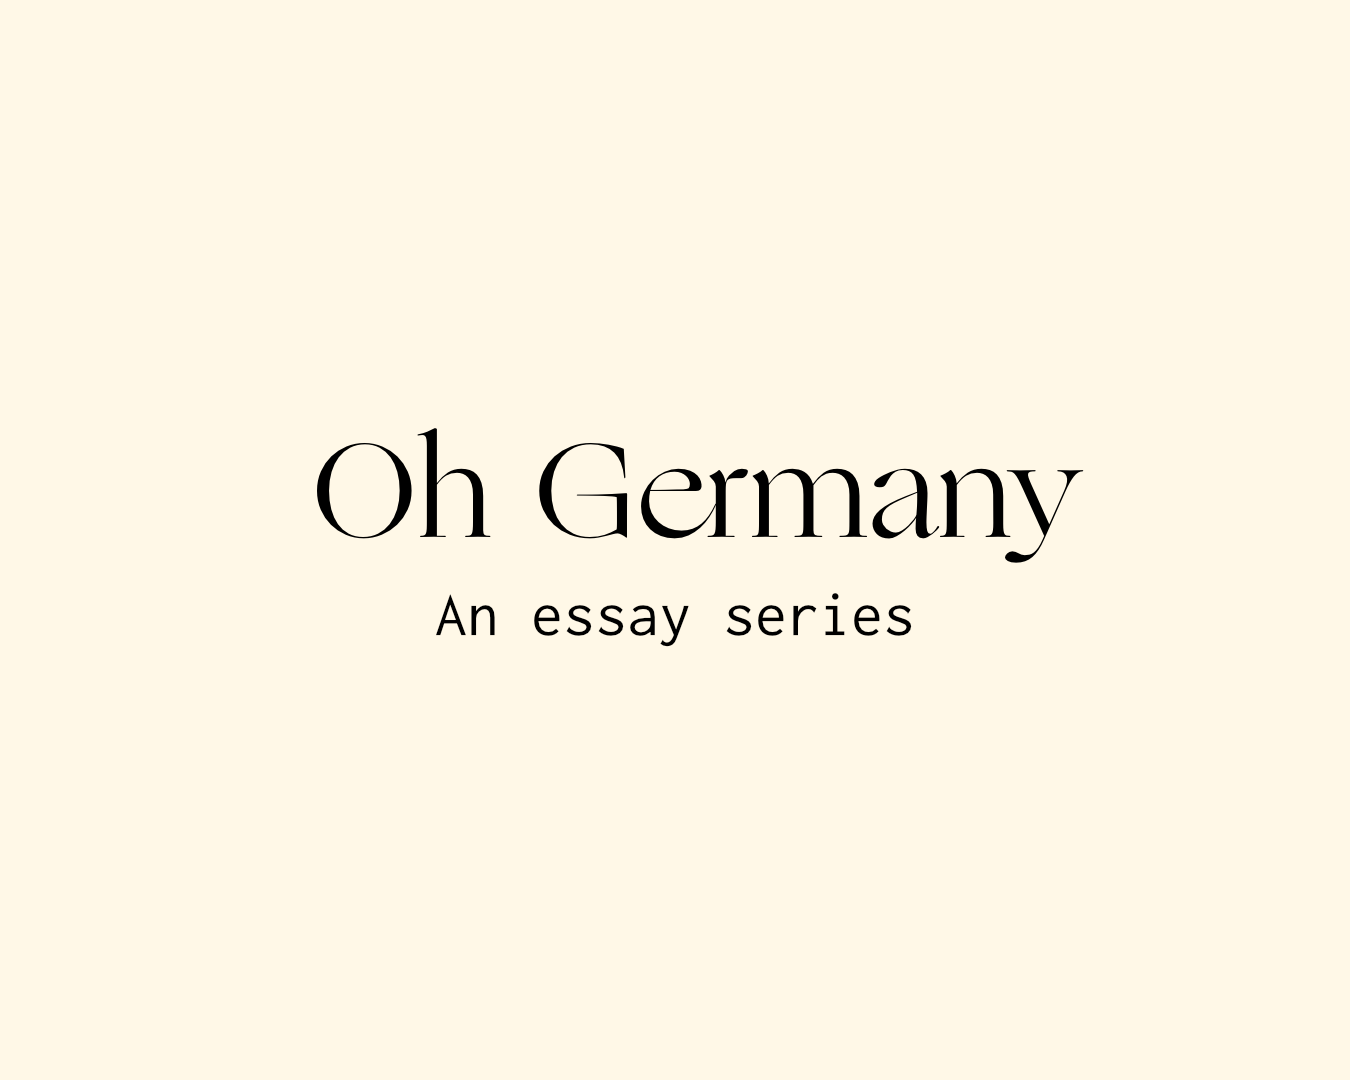 Oh Germany, an essay series